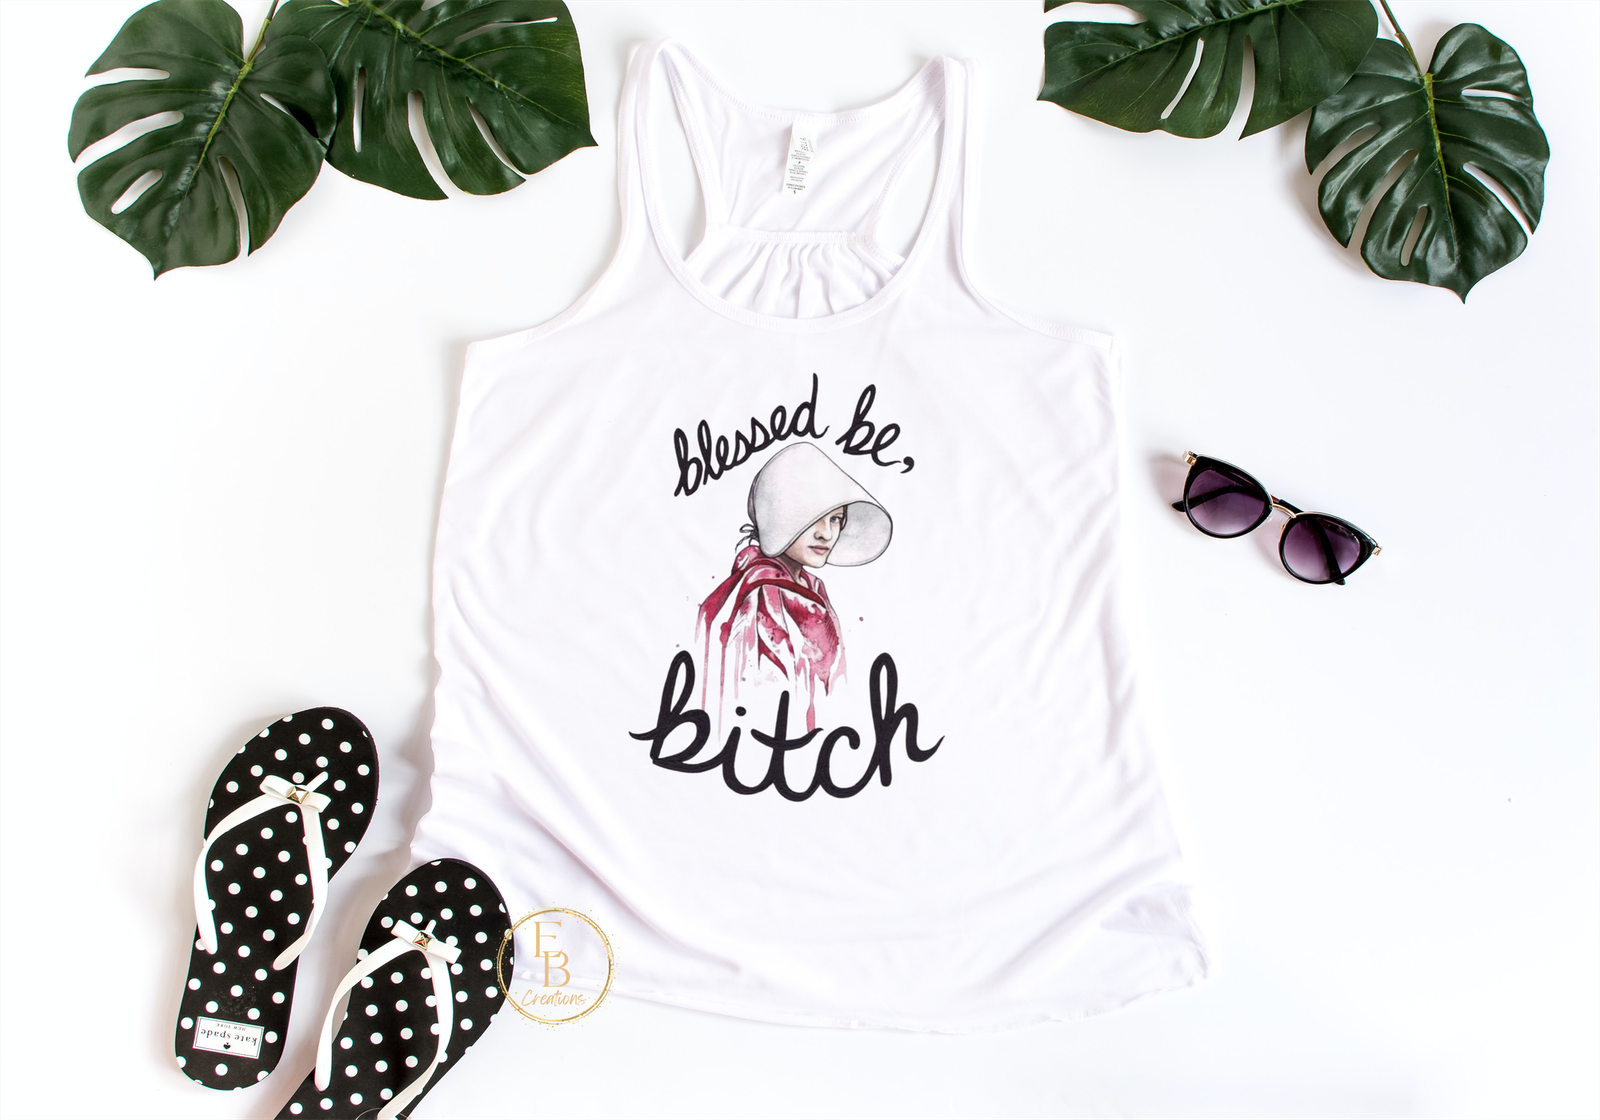 Blessed be Bitch graphic T-shirt | Funny Tee for daily wear - Eb Creations Blessed be Bitch graphic T-shirt | Funny Tee for daily wear